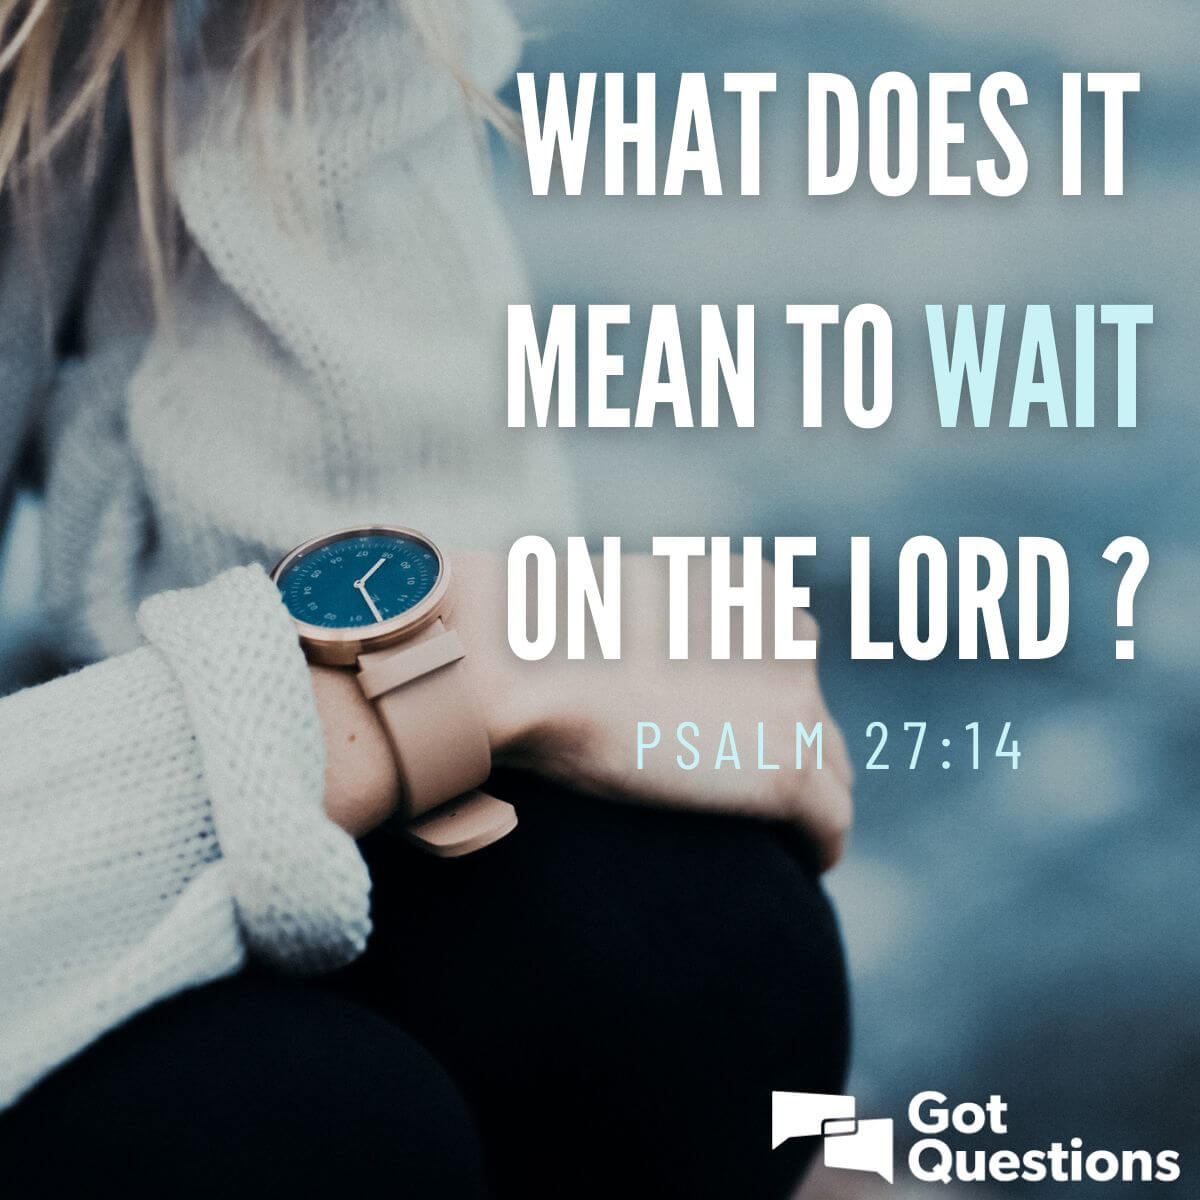 What does it mean to wait on the Lord?